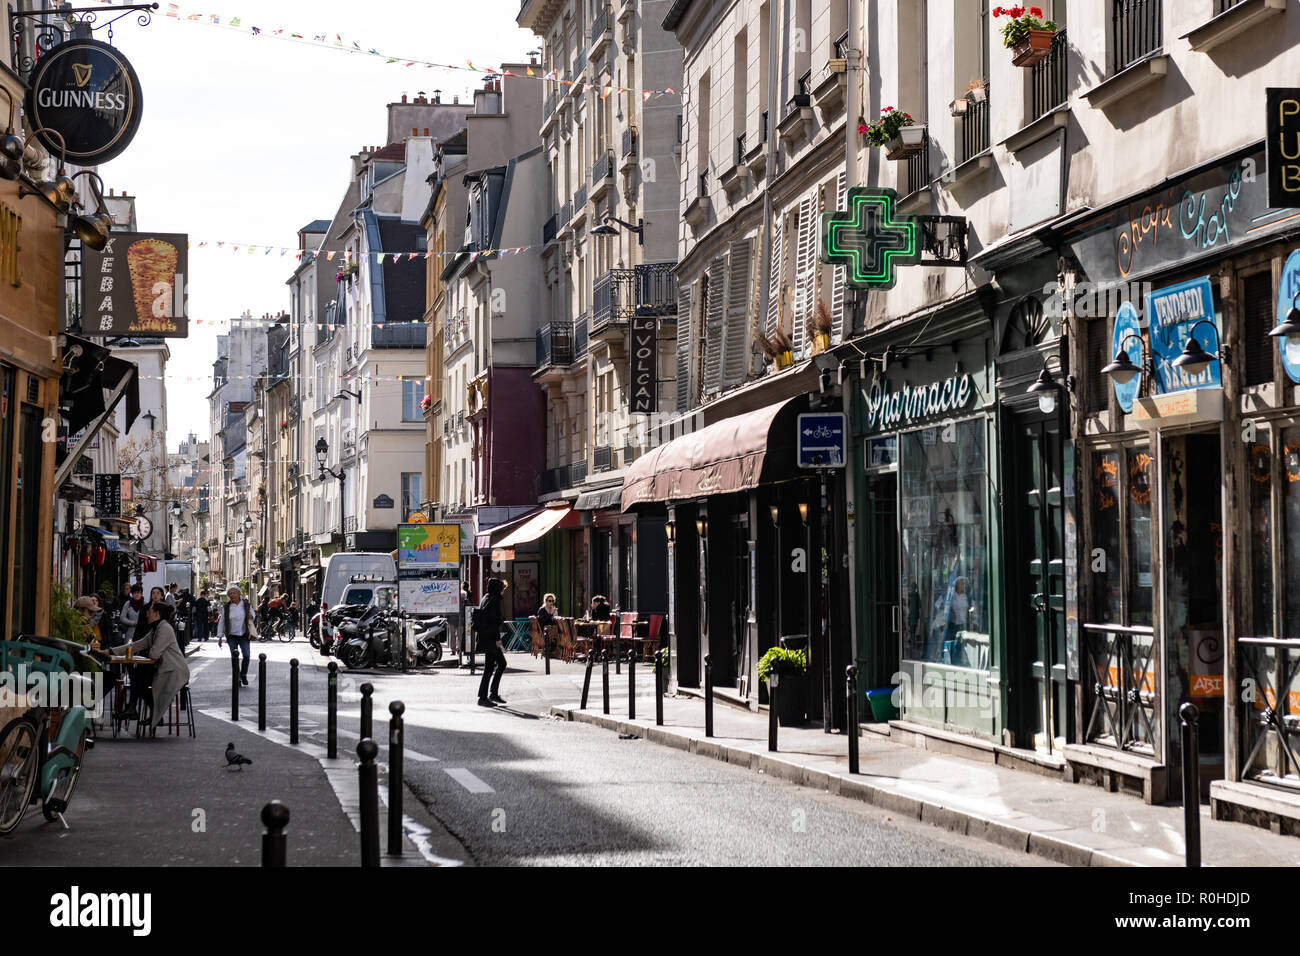 Shops and restaurants in the Mouffetard street in Paris. Stock Photo